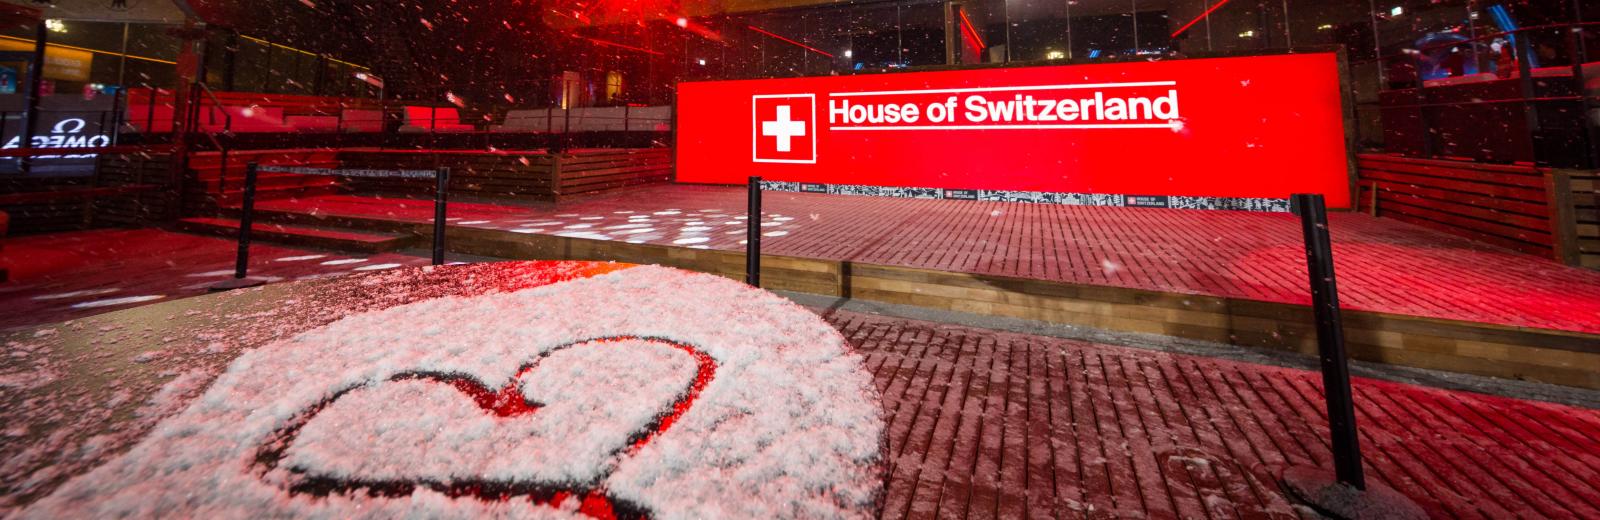 House of Switzerland Winter Olympic Games